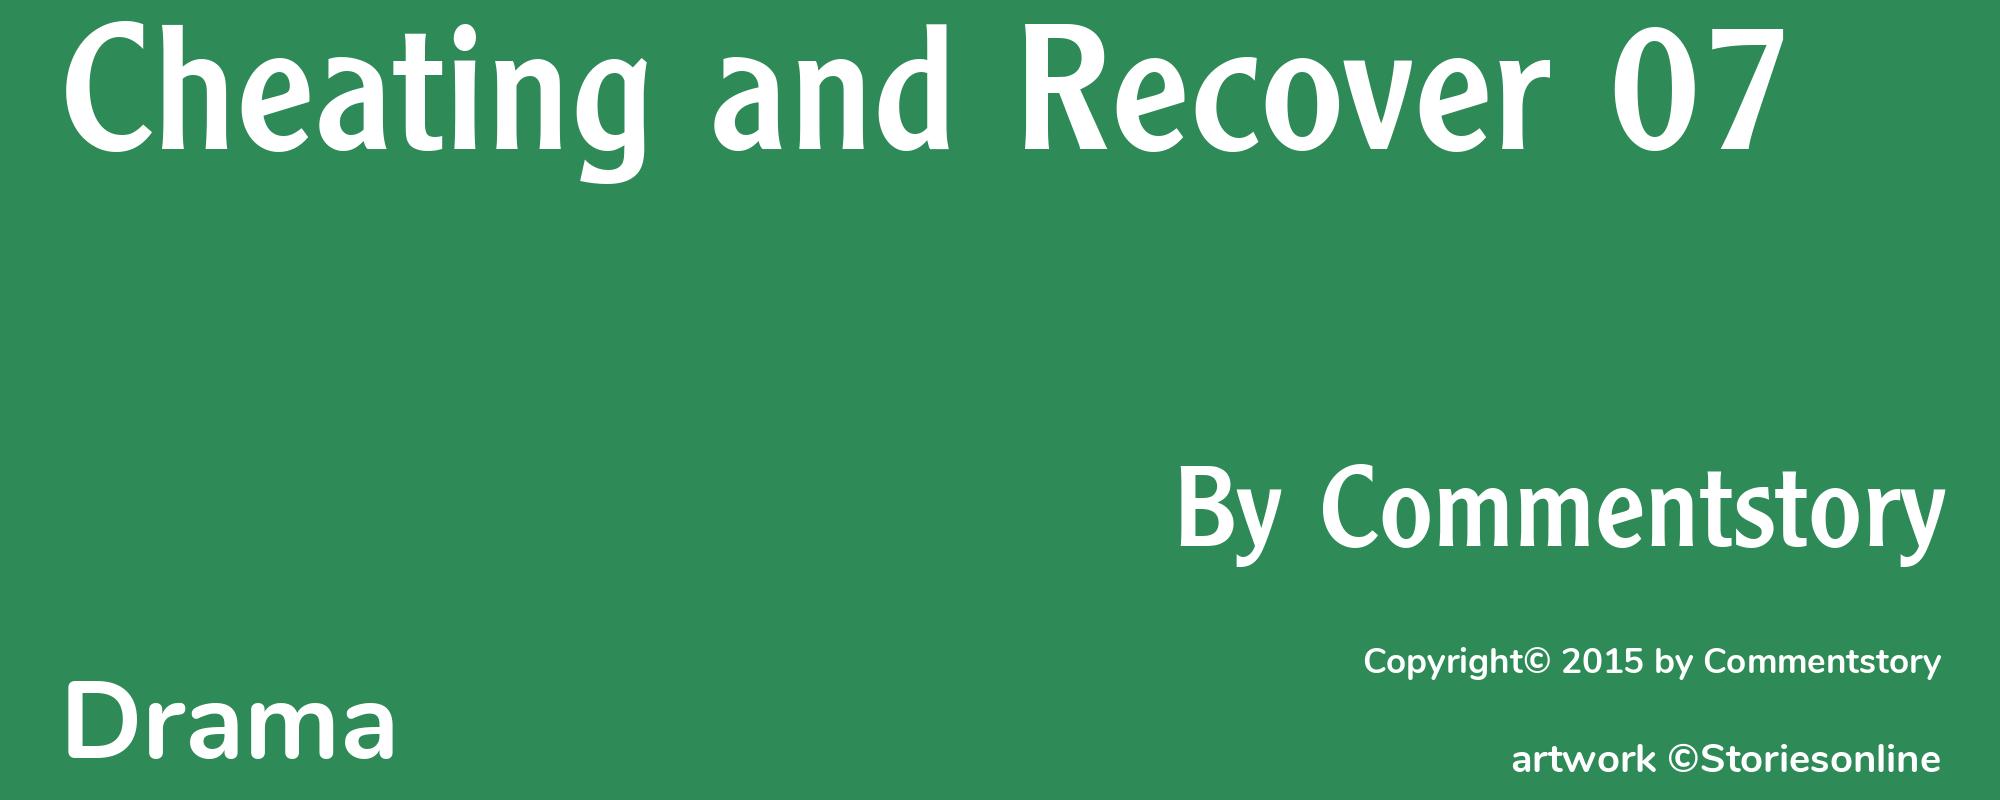 Cheating and Recover 07 - Cover